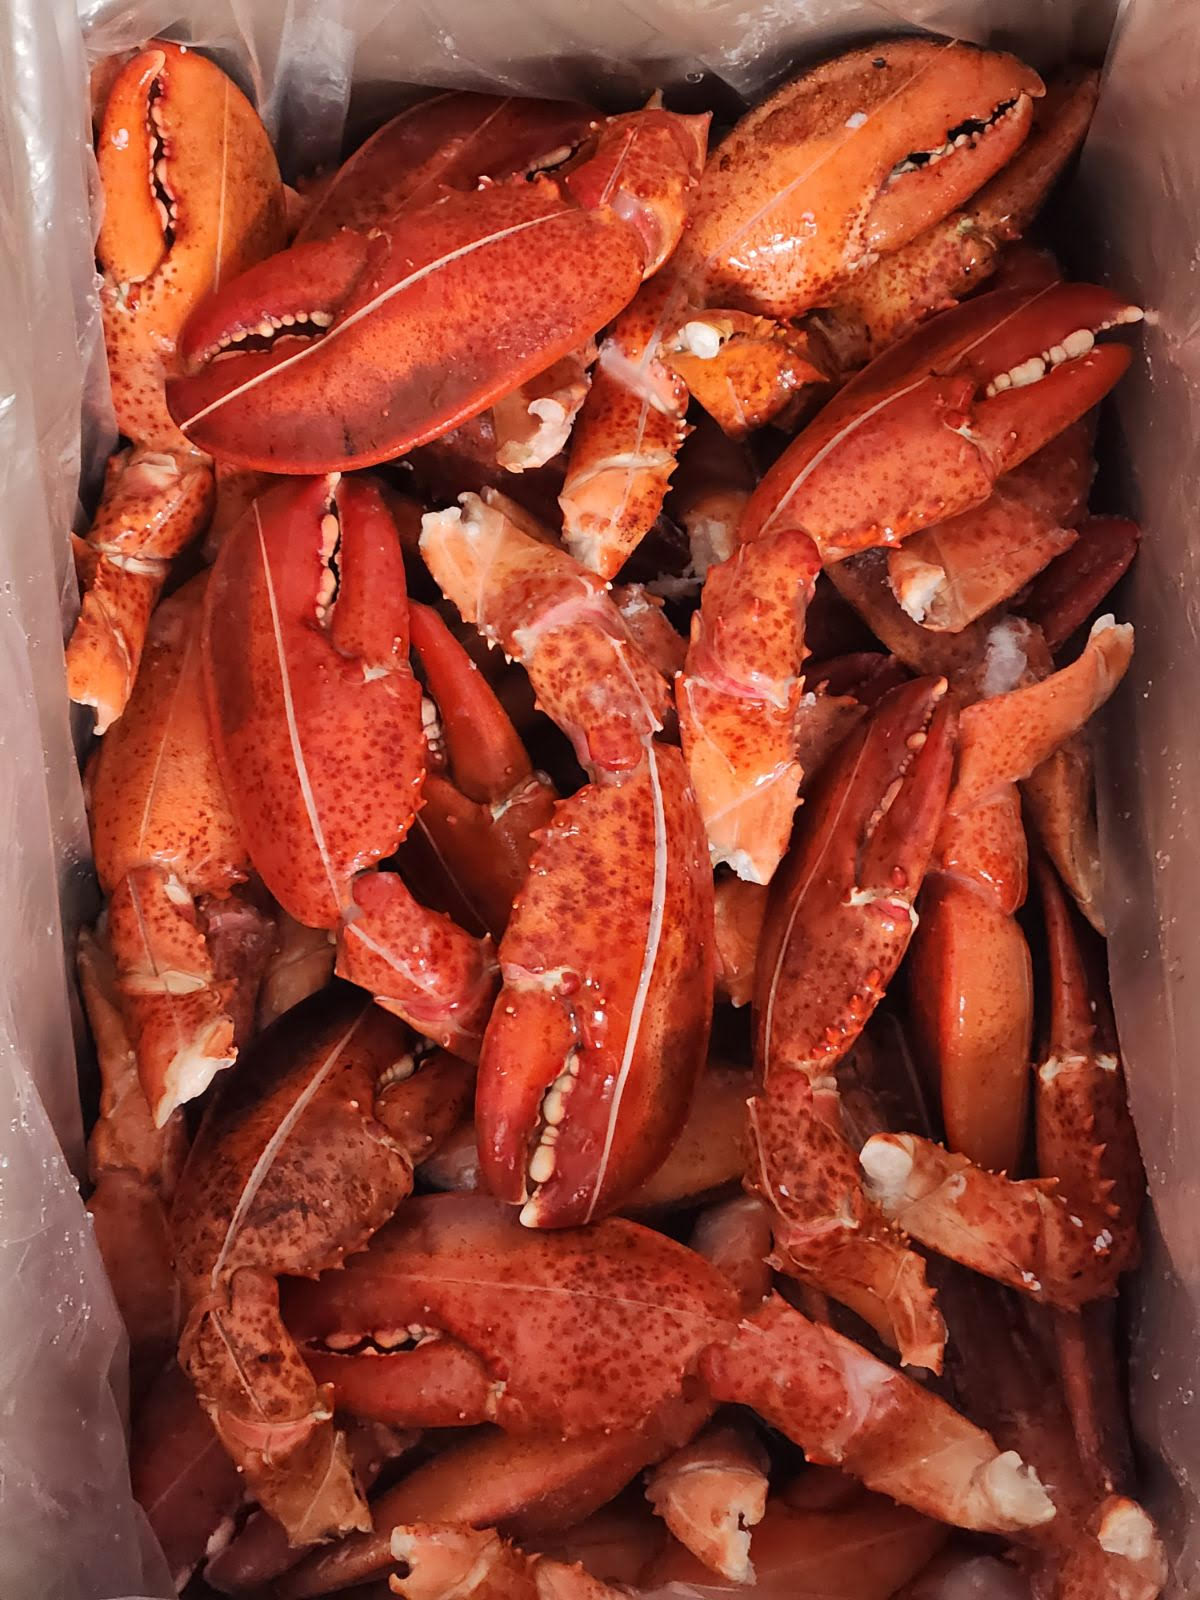 Whole Cooked, Scored &amp; Frozen Lobster Claws &amp; Knuckles / Frozen Cooked and Scored Lobster Claws &amp; Arm in Shell - 3 lb